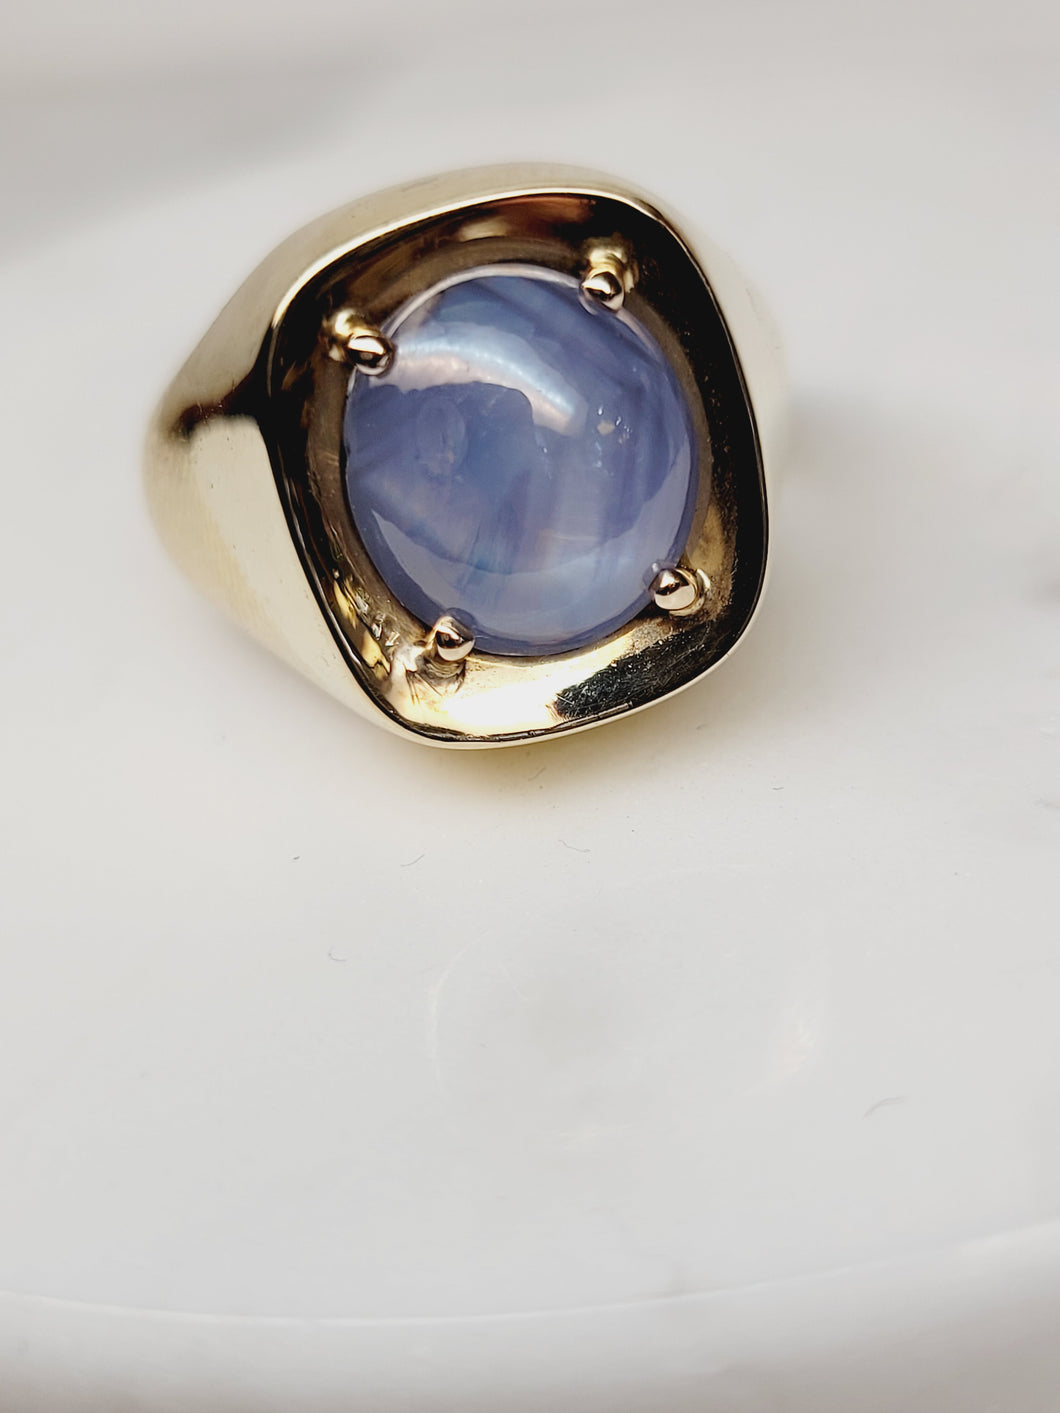 Blue Star Sapphire set in a 14k Yellow Gold band